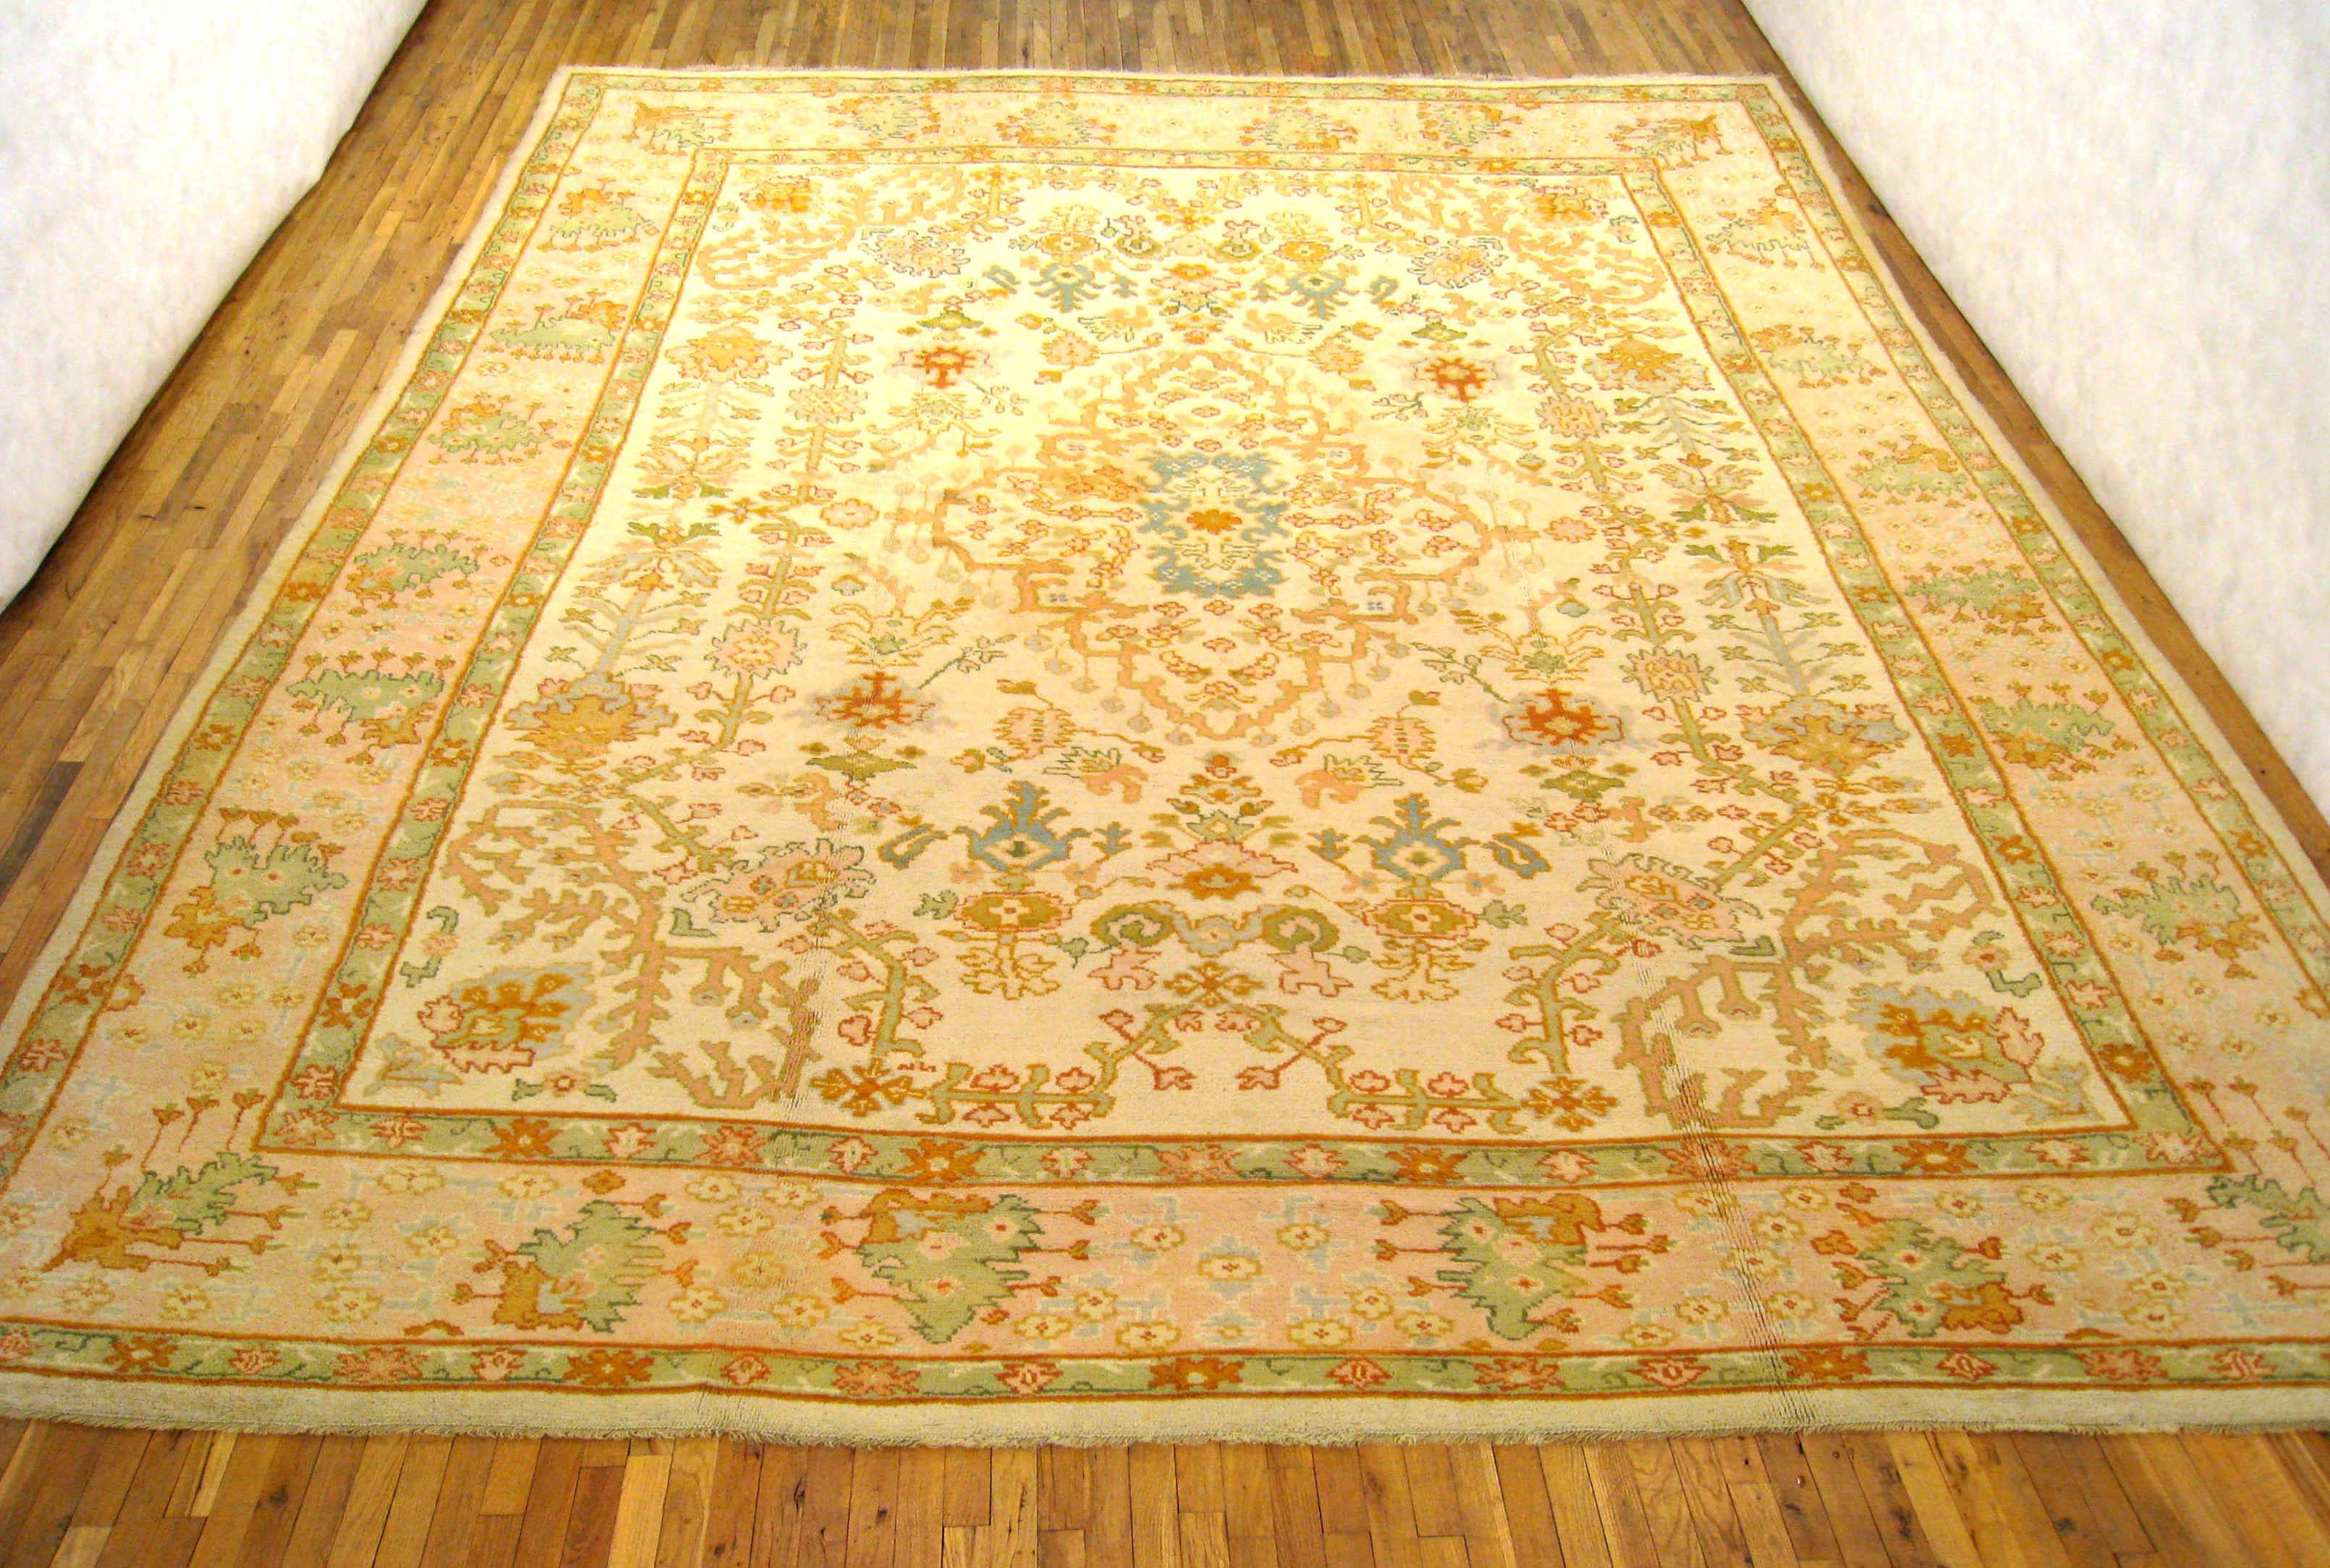 A gorgeous antique Turkish Oushak carpet, circa 1900, size 15'8 x 13'1. This lovely carpet features an unusual design in the ivory central field, characterized by floral blossoms, vines, and trellis motifs, with the result being delightful, but not